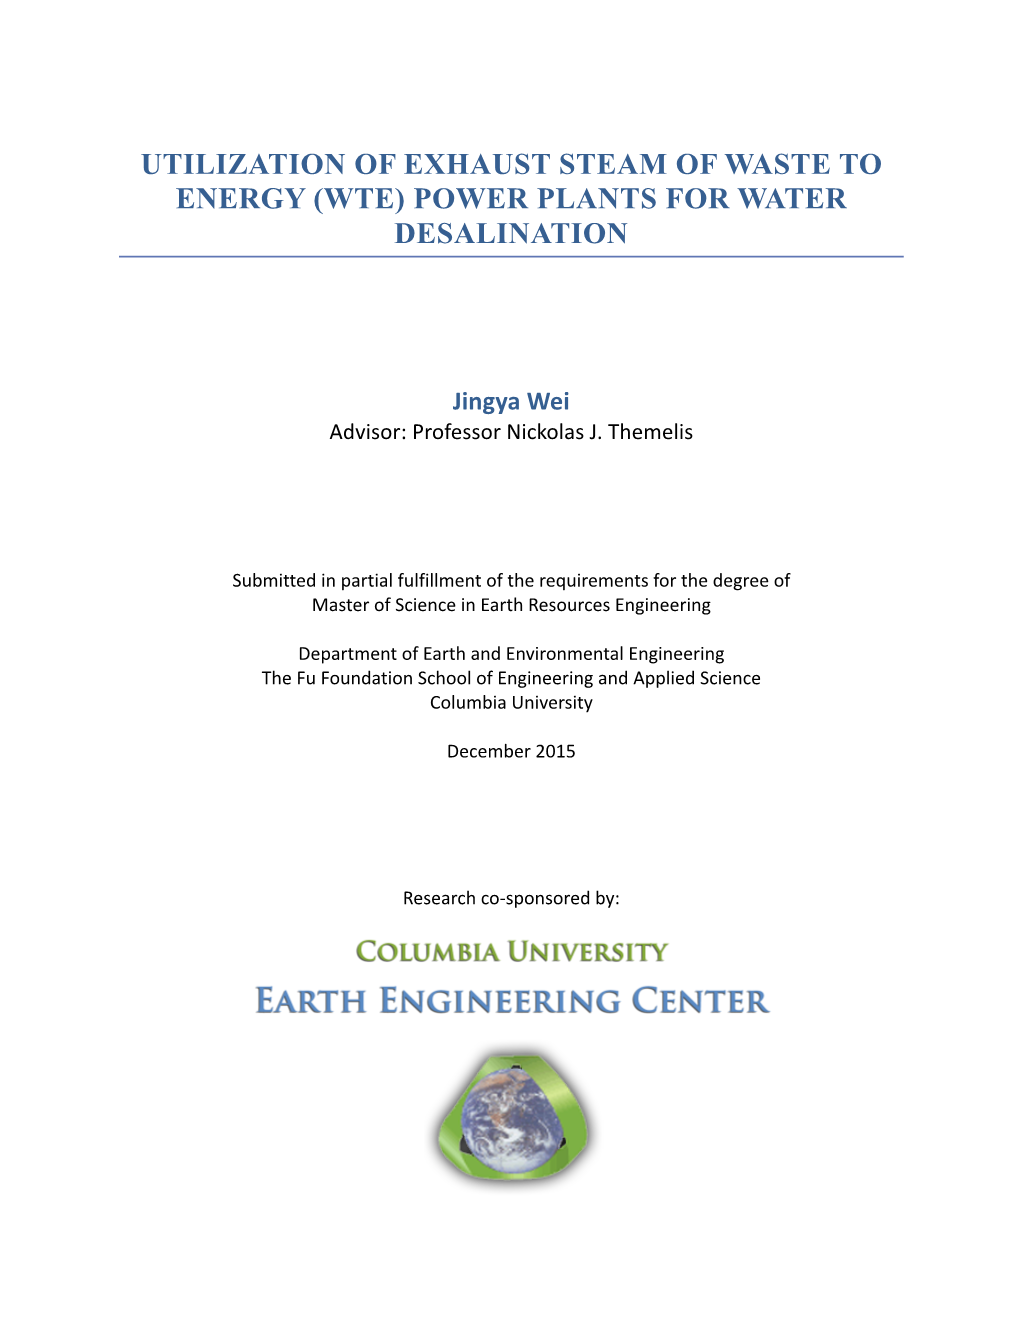 Utilization of Exhaust Steam of Waste to Energy (Wte) Power Plants for Water Desalination